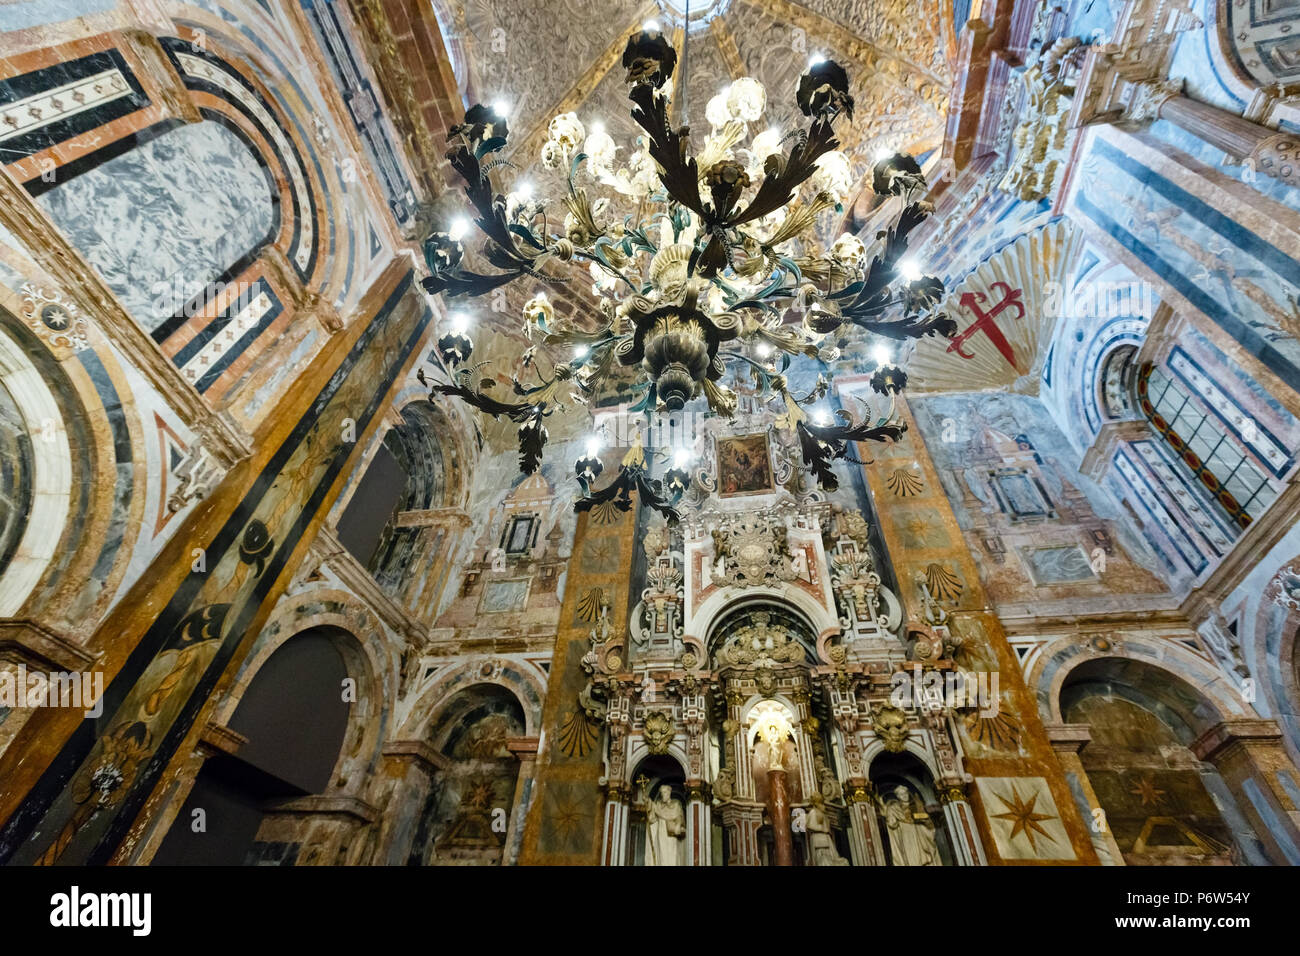 Santiago de Compostela, Spain - MAY 14, 2016: Cathedral  church inside interior ceiling view. Building in 12-18th-century. Stock Photo